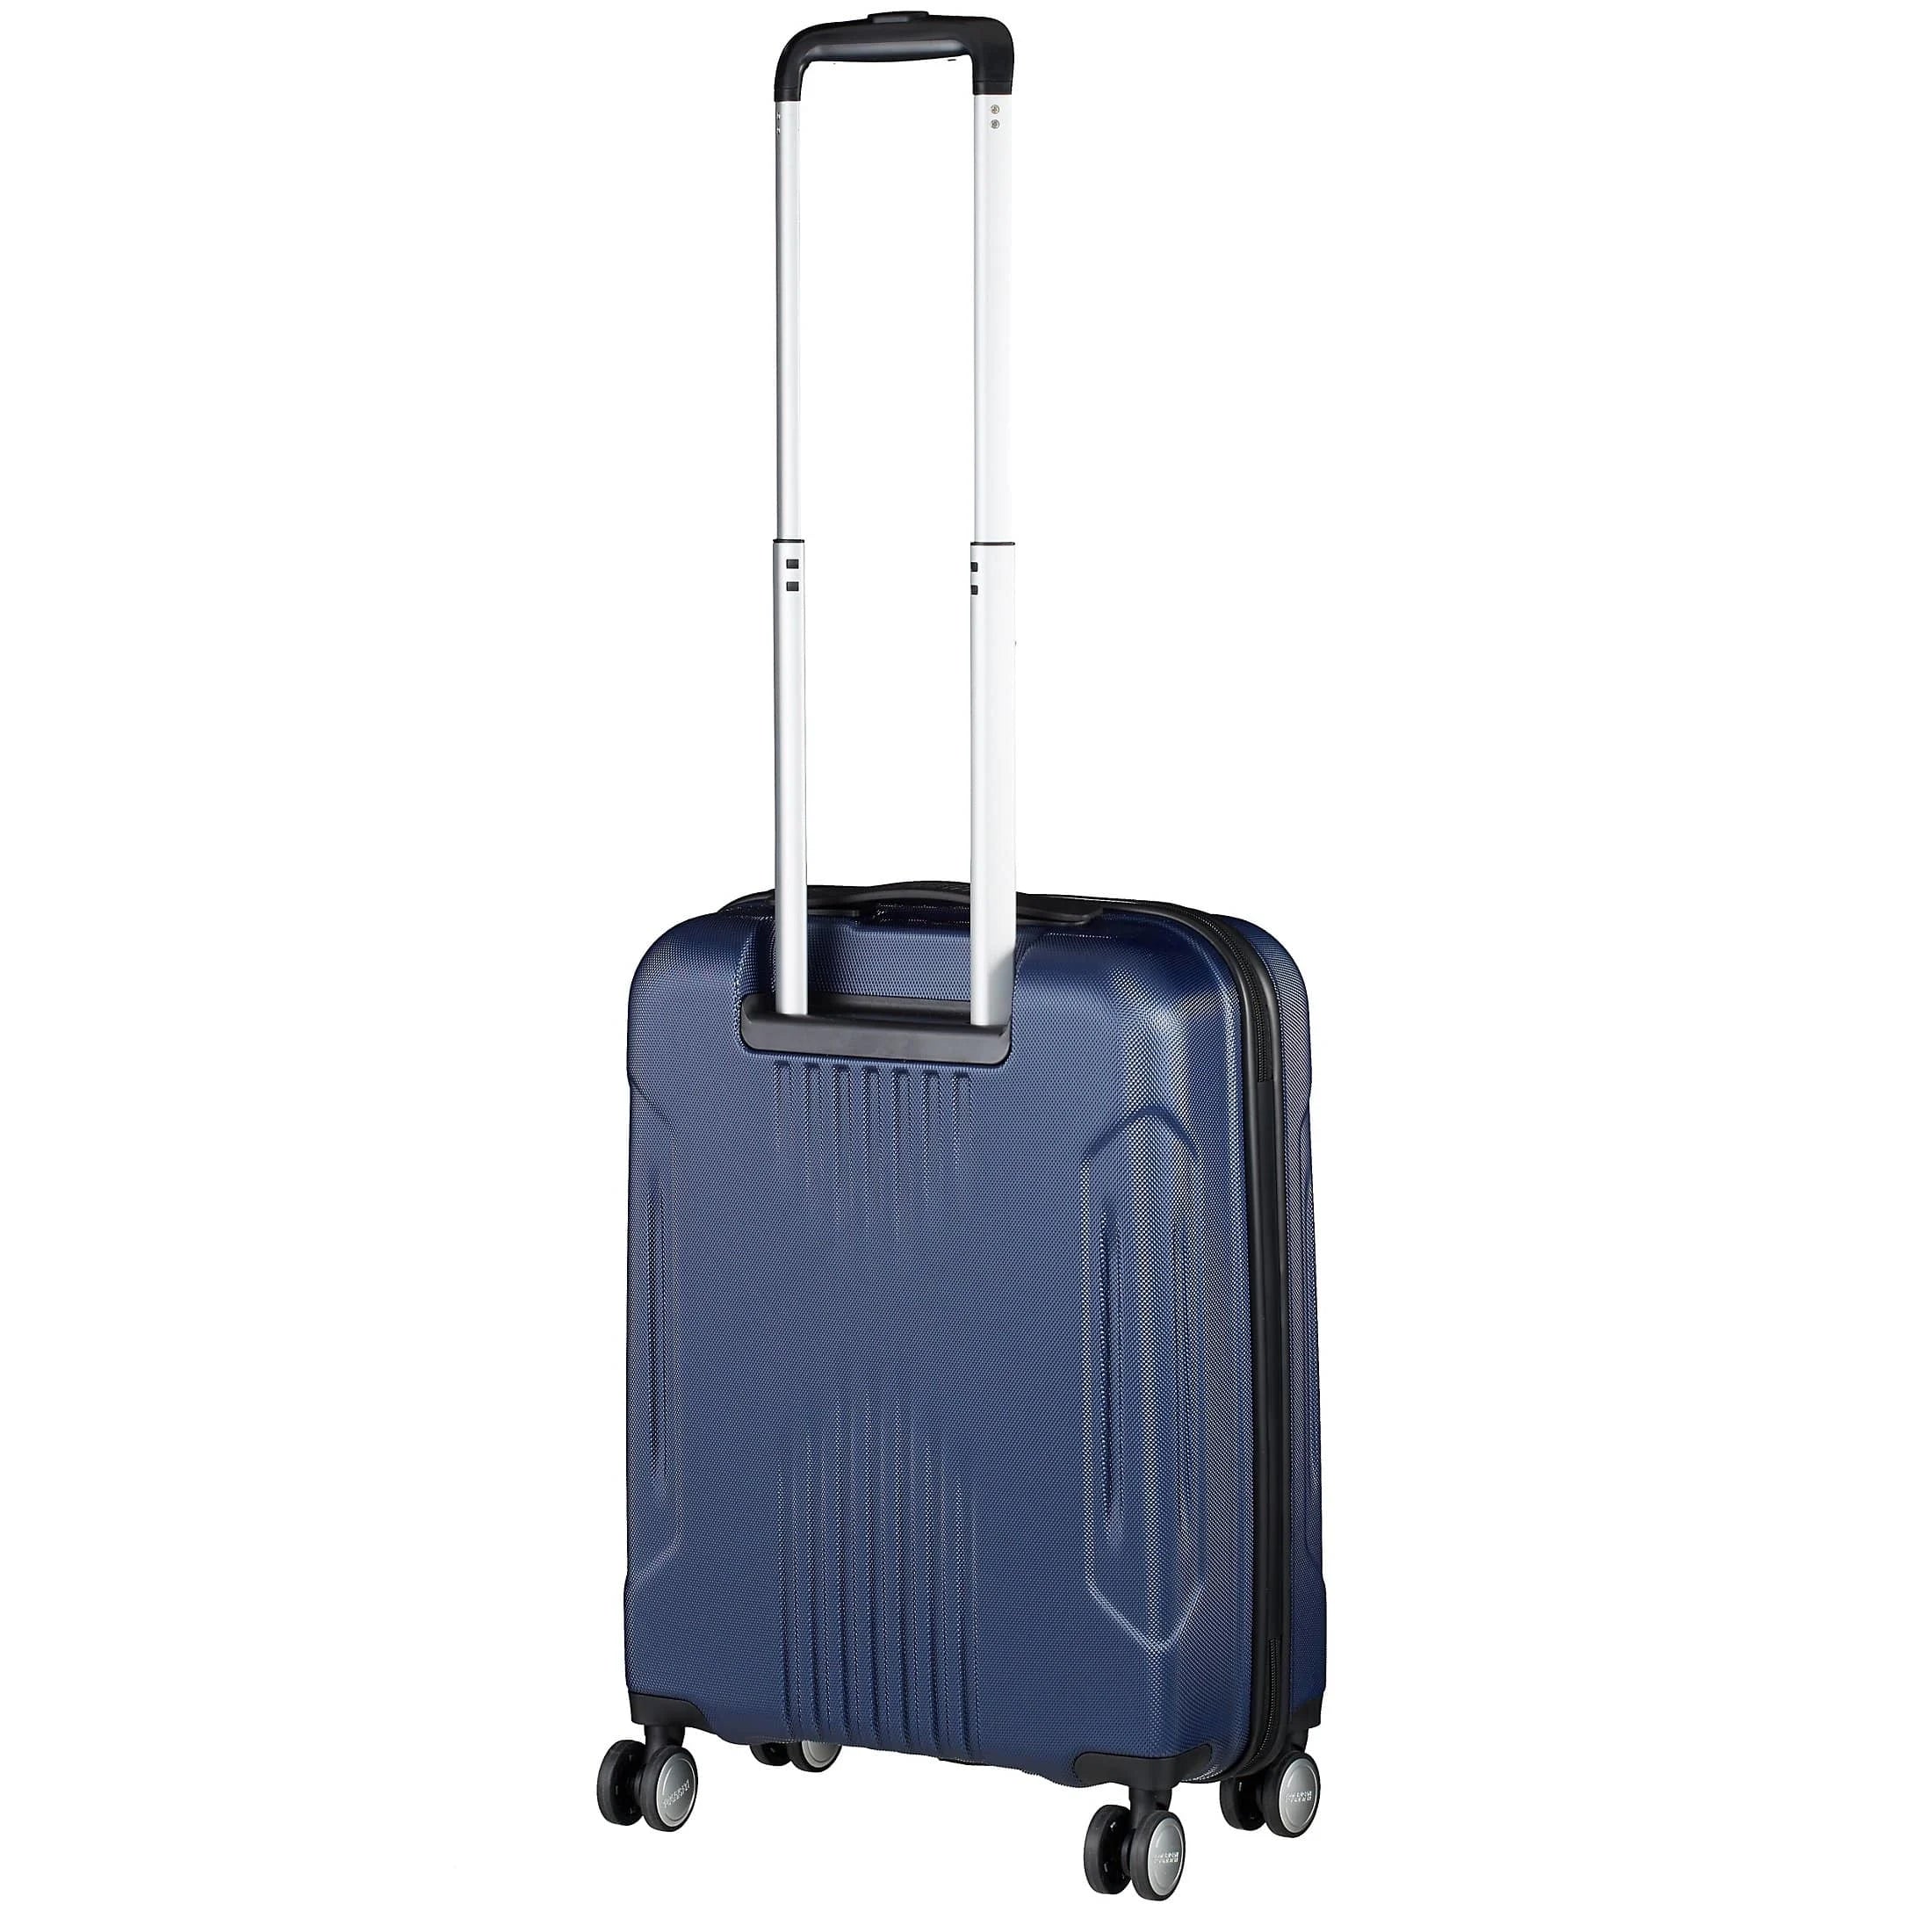 American Tourister Tracklite trolley cabine 4 roues 55 cm - marine foncé